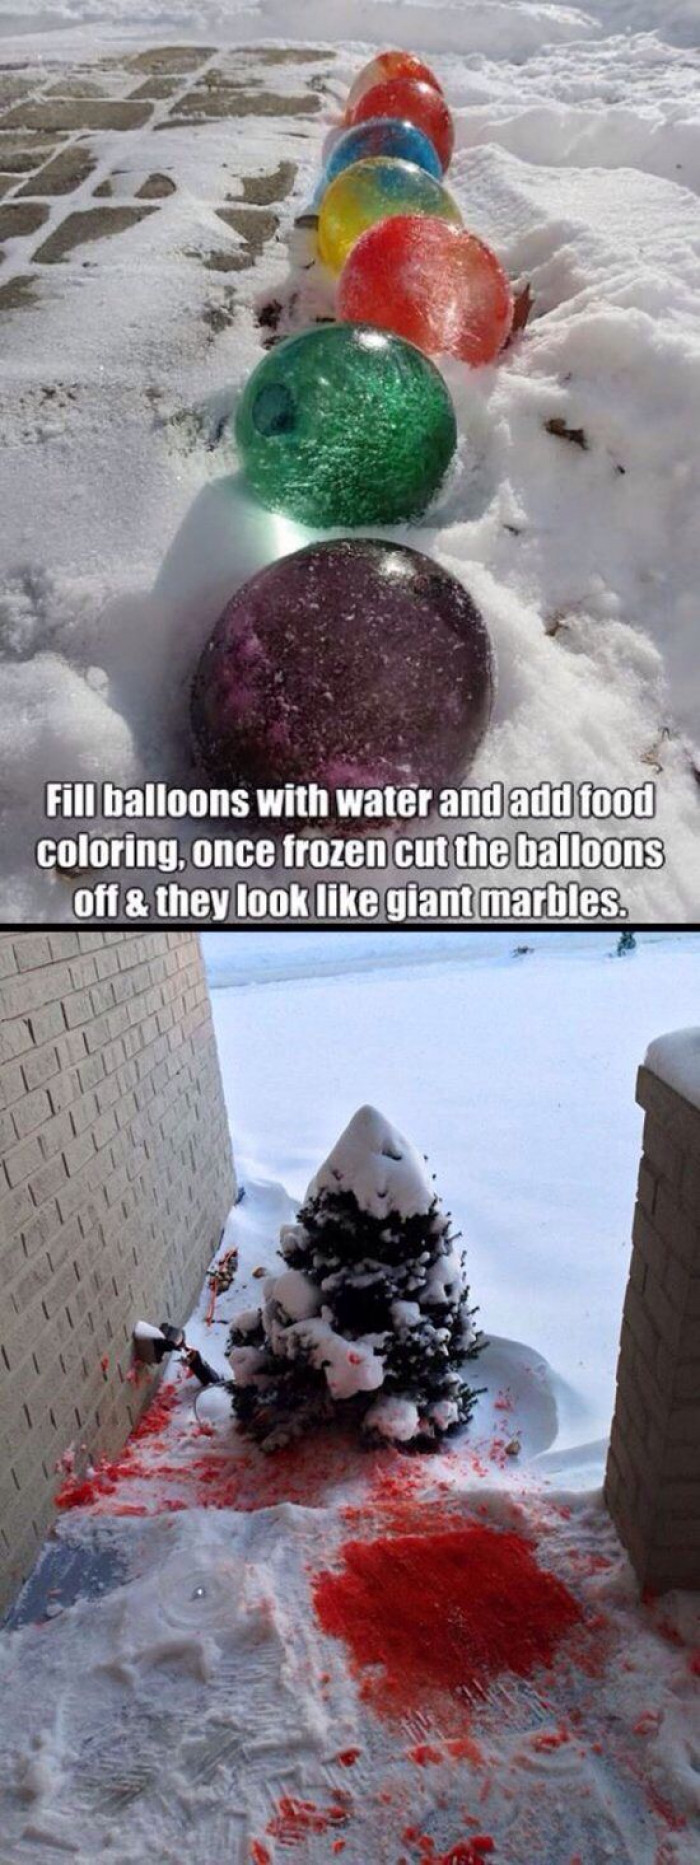 How To Make Giant Marbles